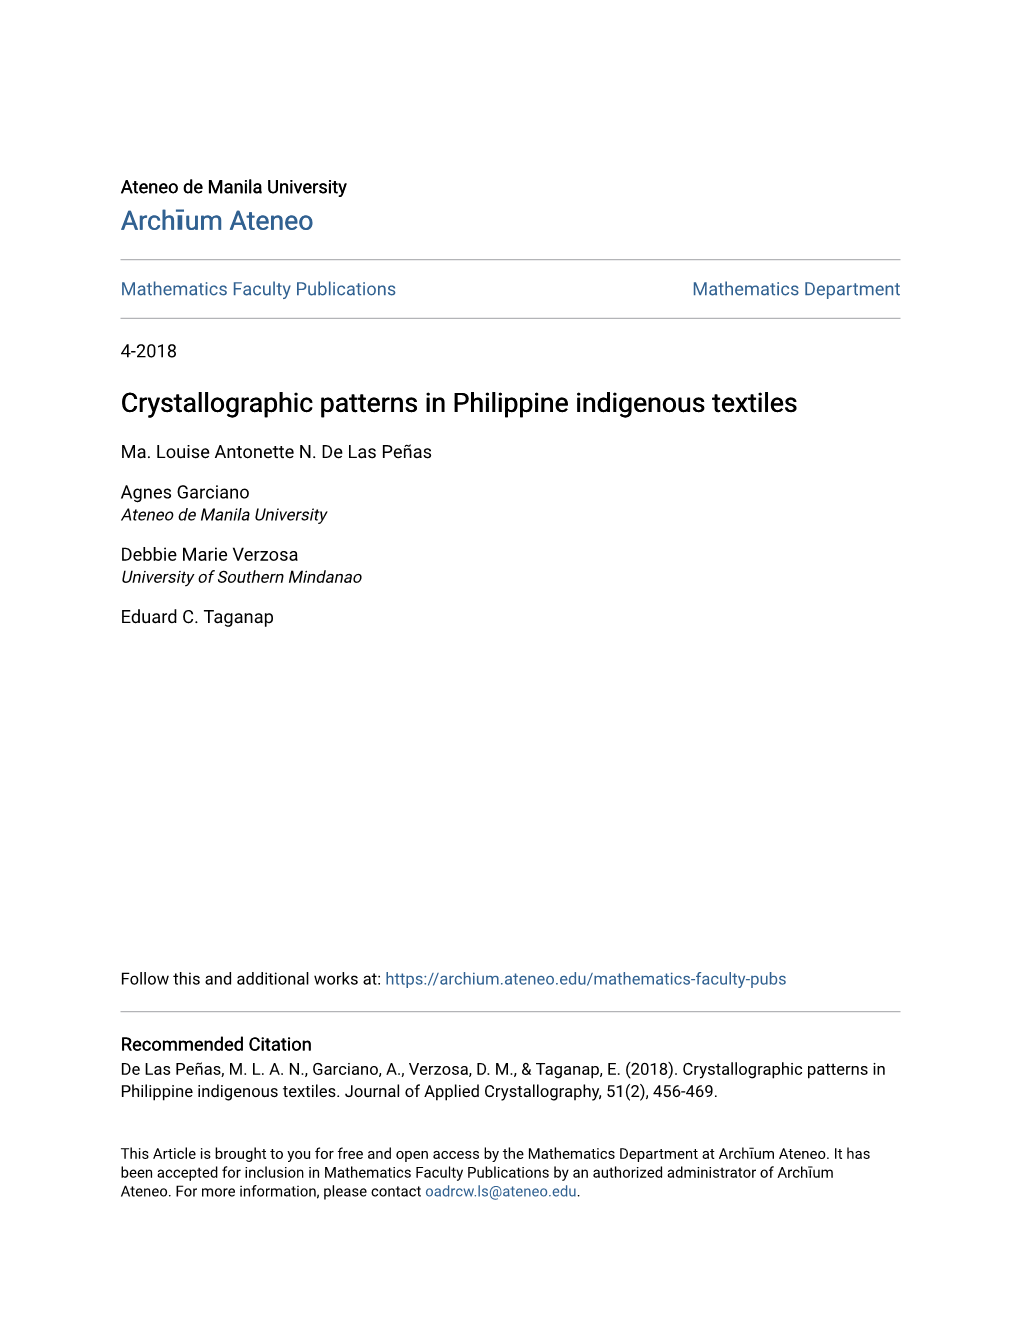 Crystallographic Patterns in Philippine Indigenous Textiles